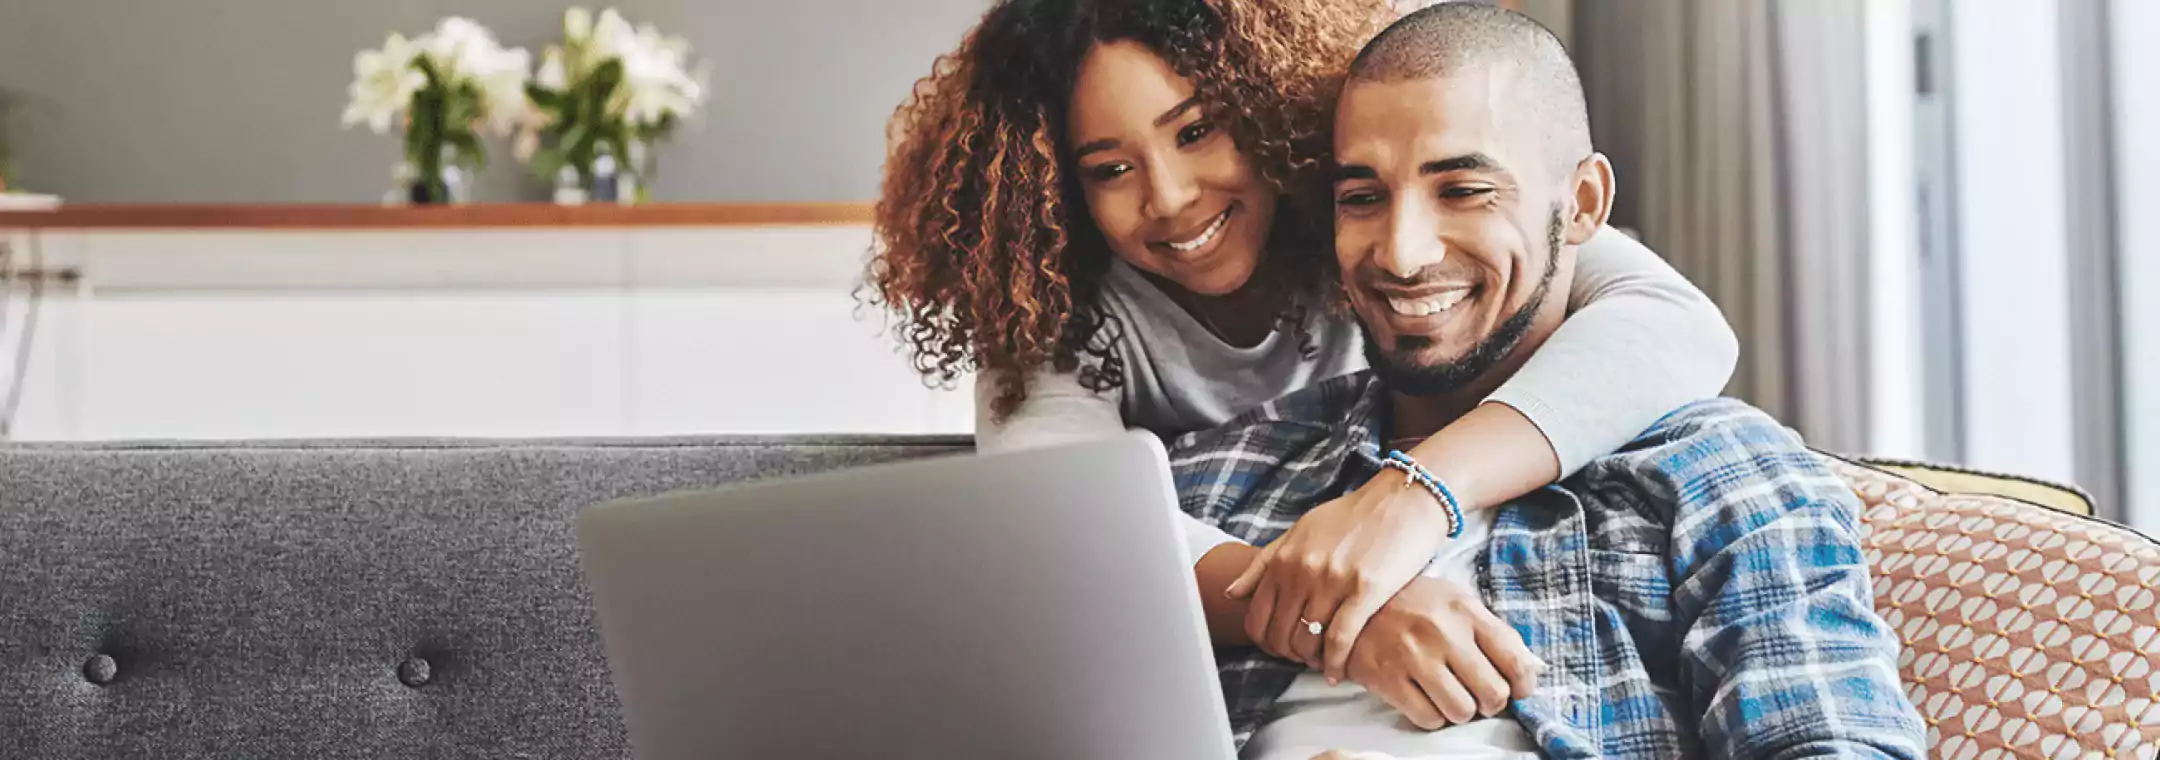 couple smiling looking at laptop